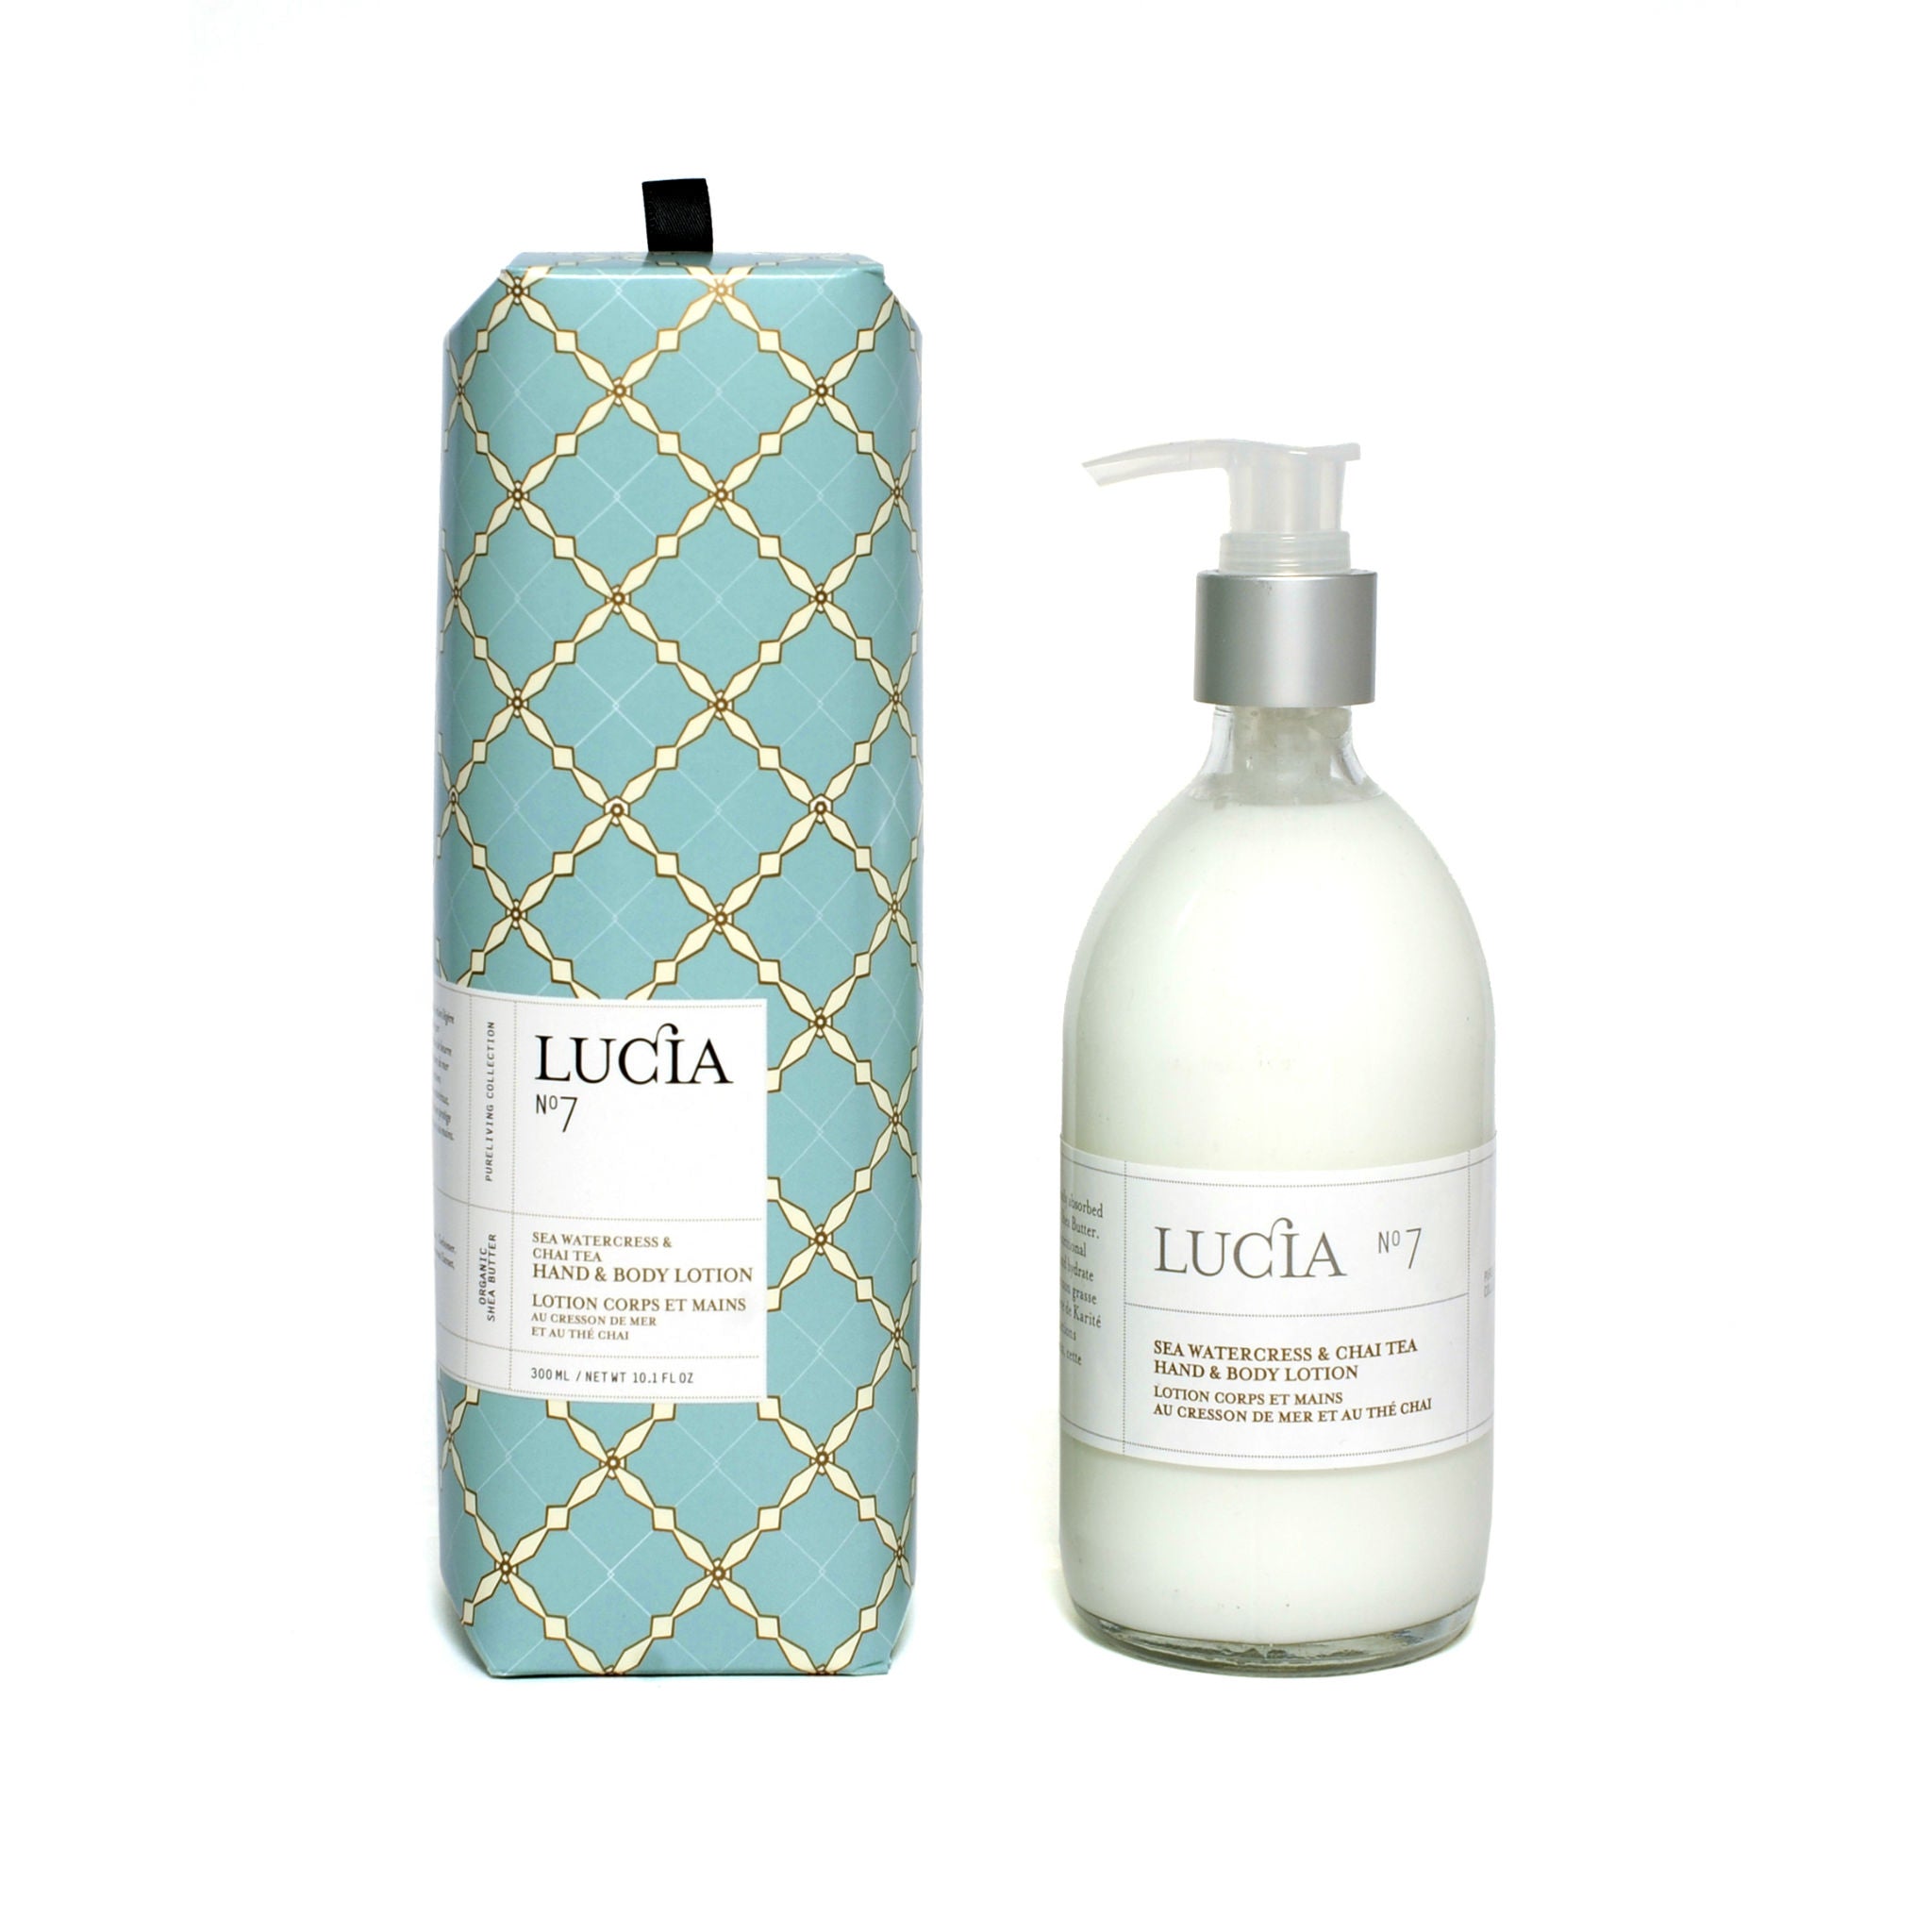 Sea Watercress & Chai Tea, Hand & Body Lotion, LUCIA-VONMEL Luxe Gifts